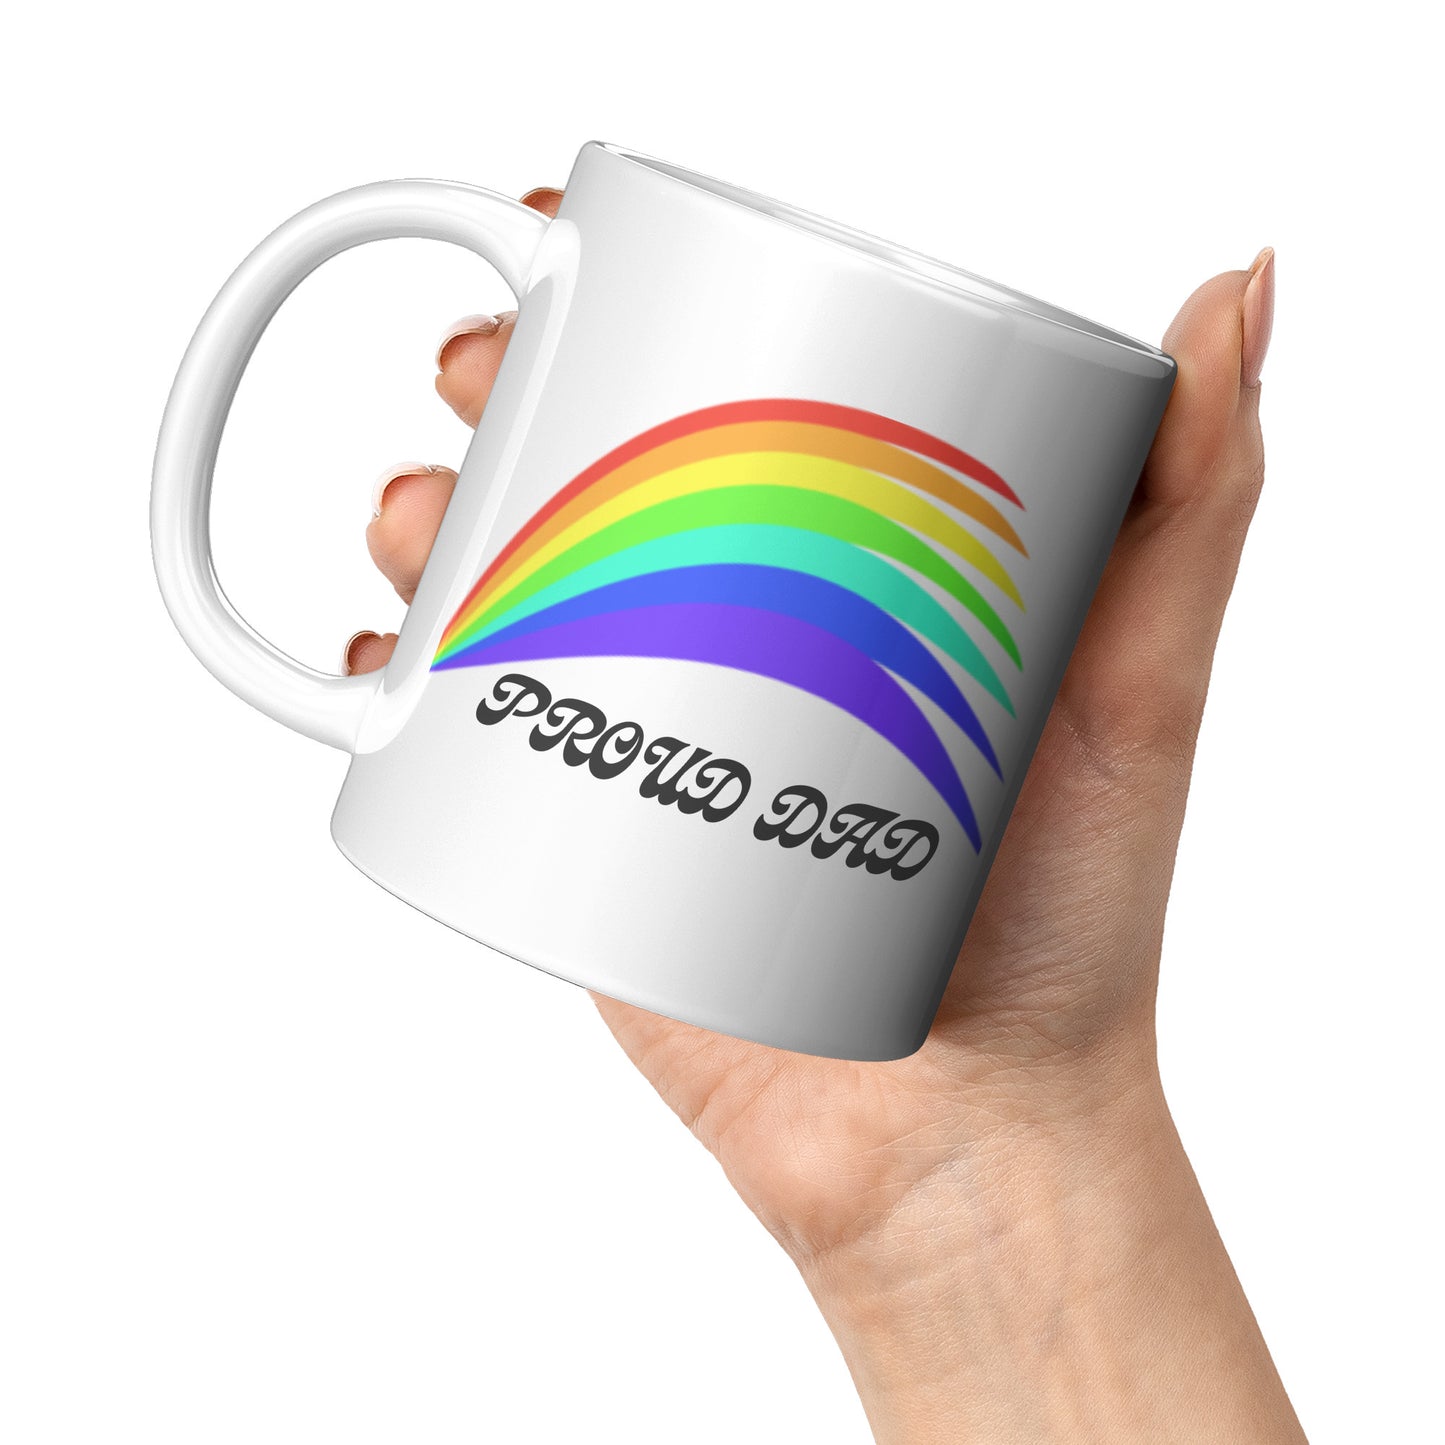 LGBTQ+ Pride Rainbow Mug For Dad To Support Your Loved Ones, White With Colourful Design